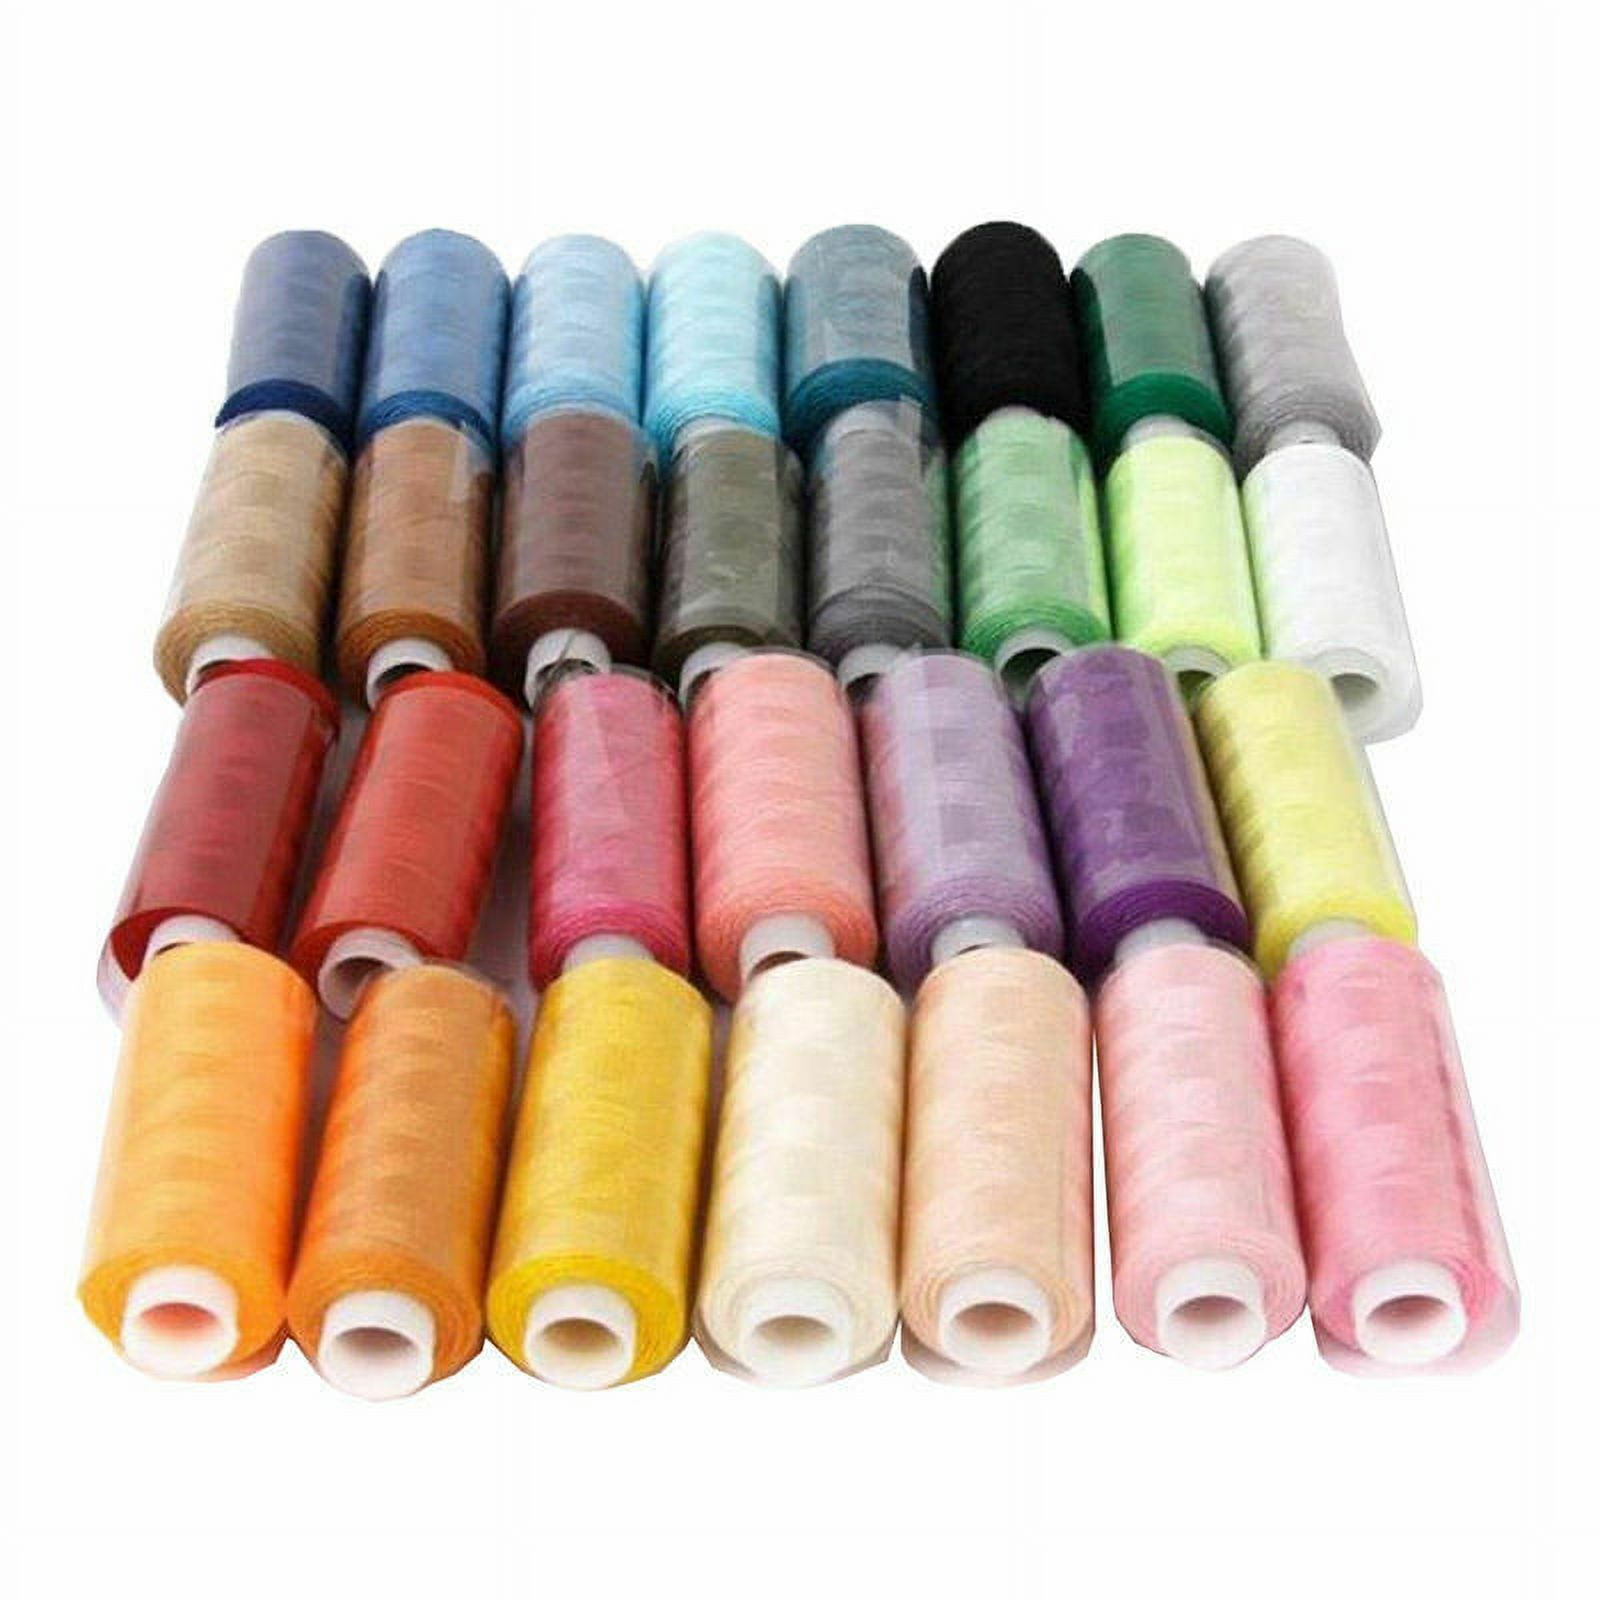 Casewin Sewing Thread Assortment Coil 30 Color 250 Yards Each Polyester  Thread Sewing Kit All Purpose Polyester Thread for Hand and Machine Sewing